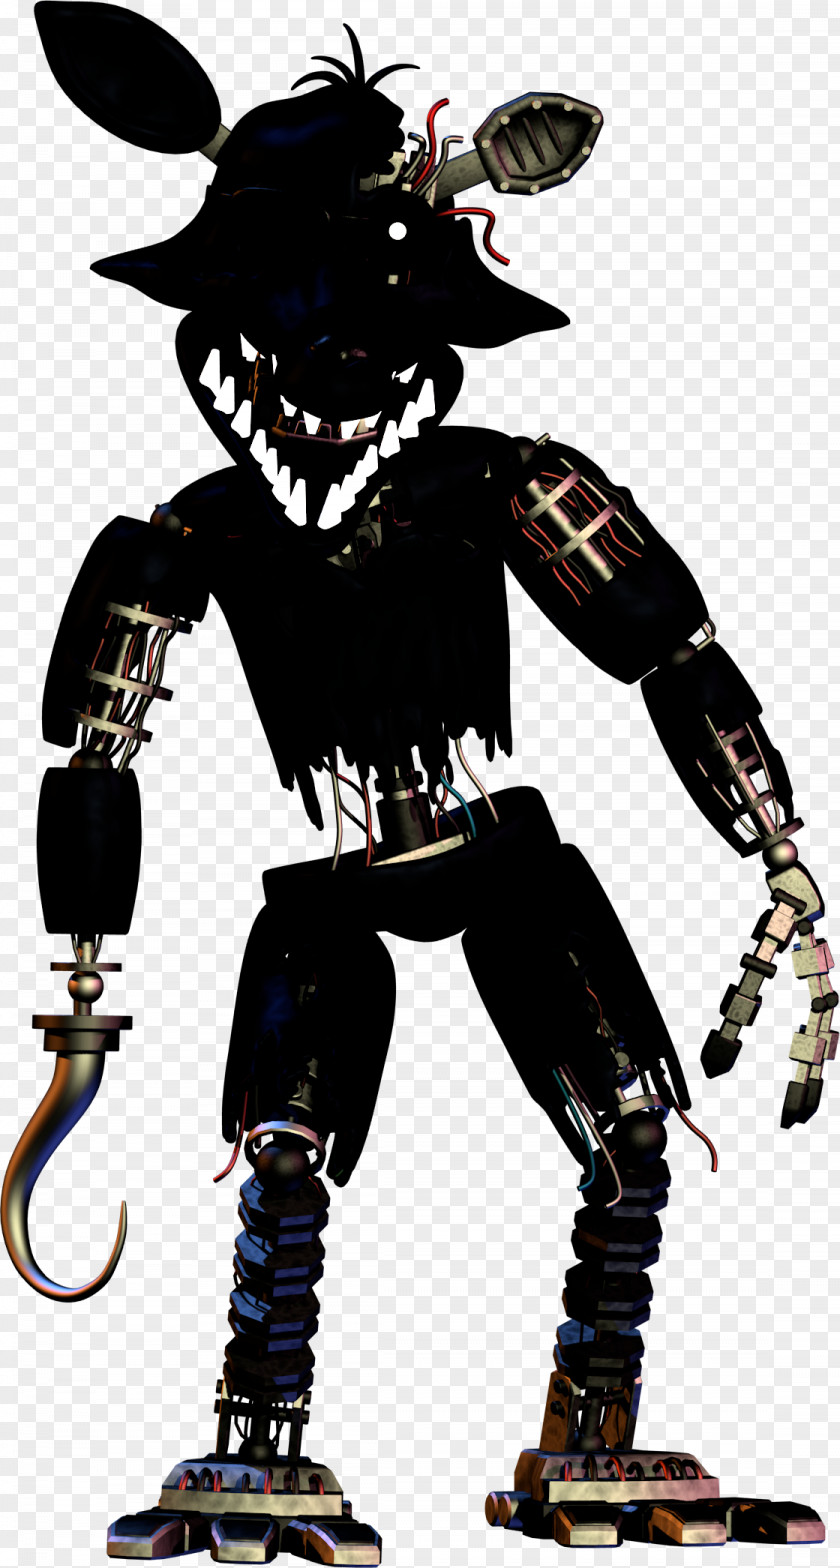 Five Nights At Freddy's: Sister Location Pizzaria Robot PNG